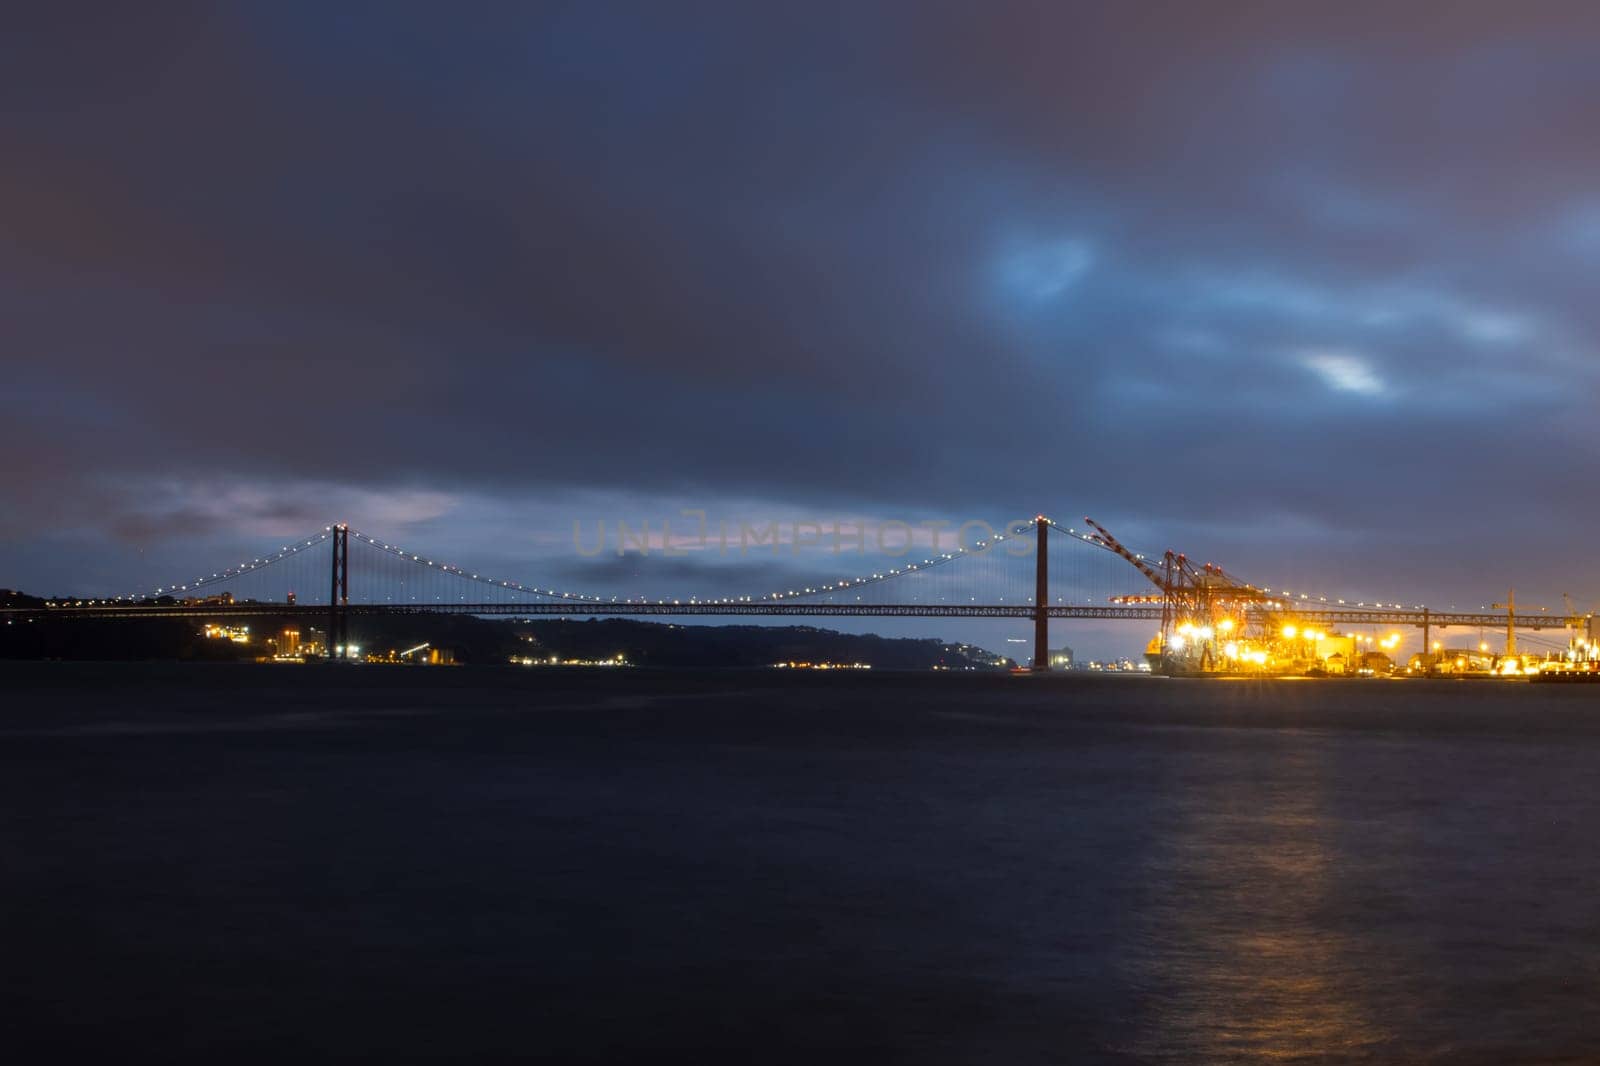 Tagus river and 25th of april bridge - night landscape. Mid shot